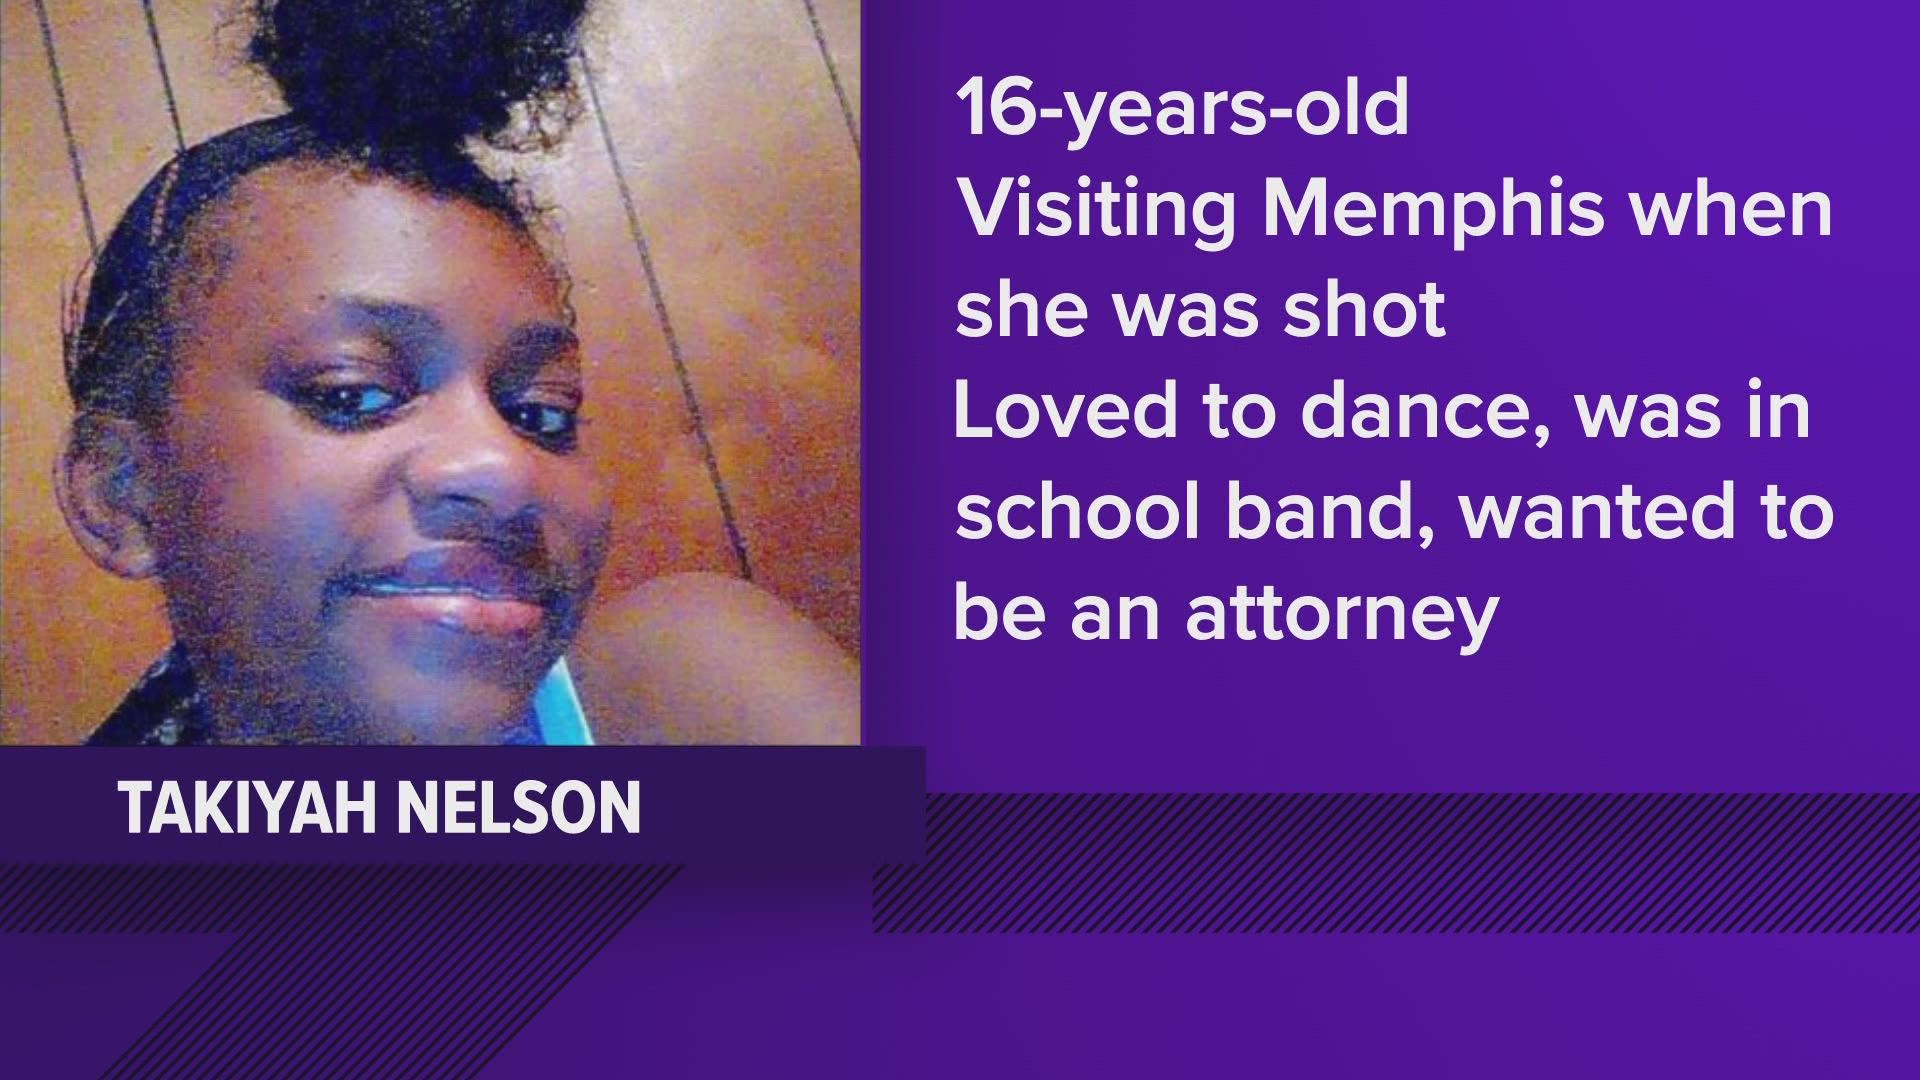 ABC24 spoke with the teen girl's mother, who said the girl's name was Takiyah Nelson, and she was 16-year-old.